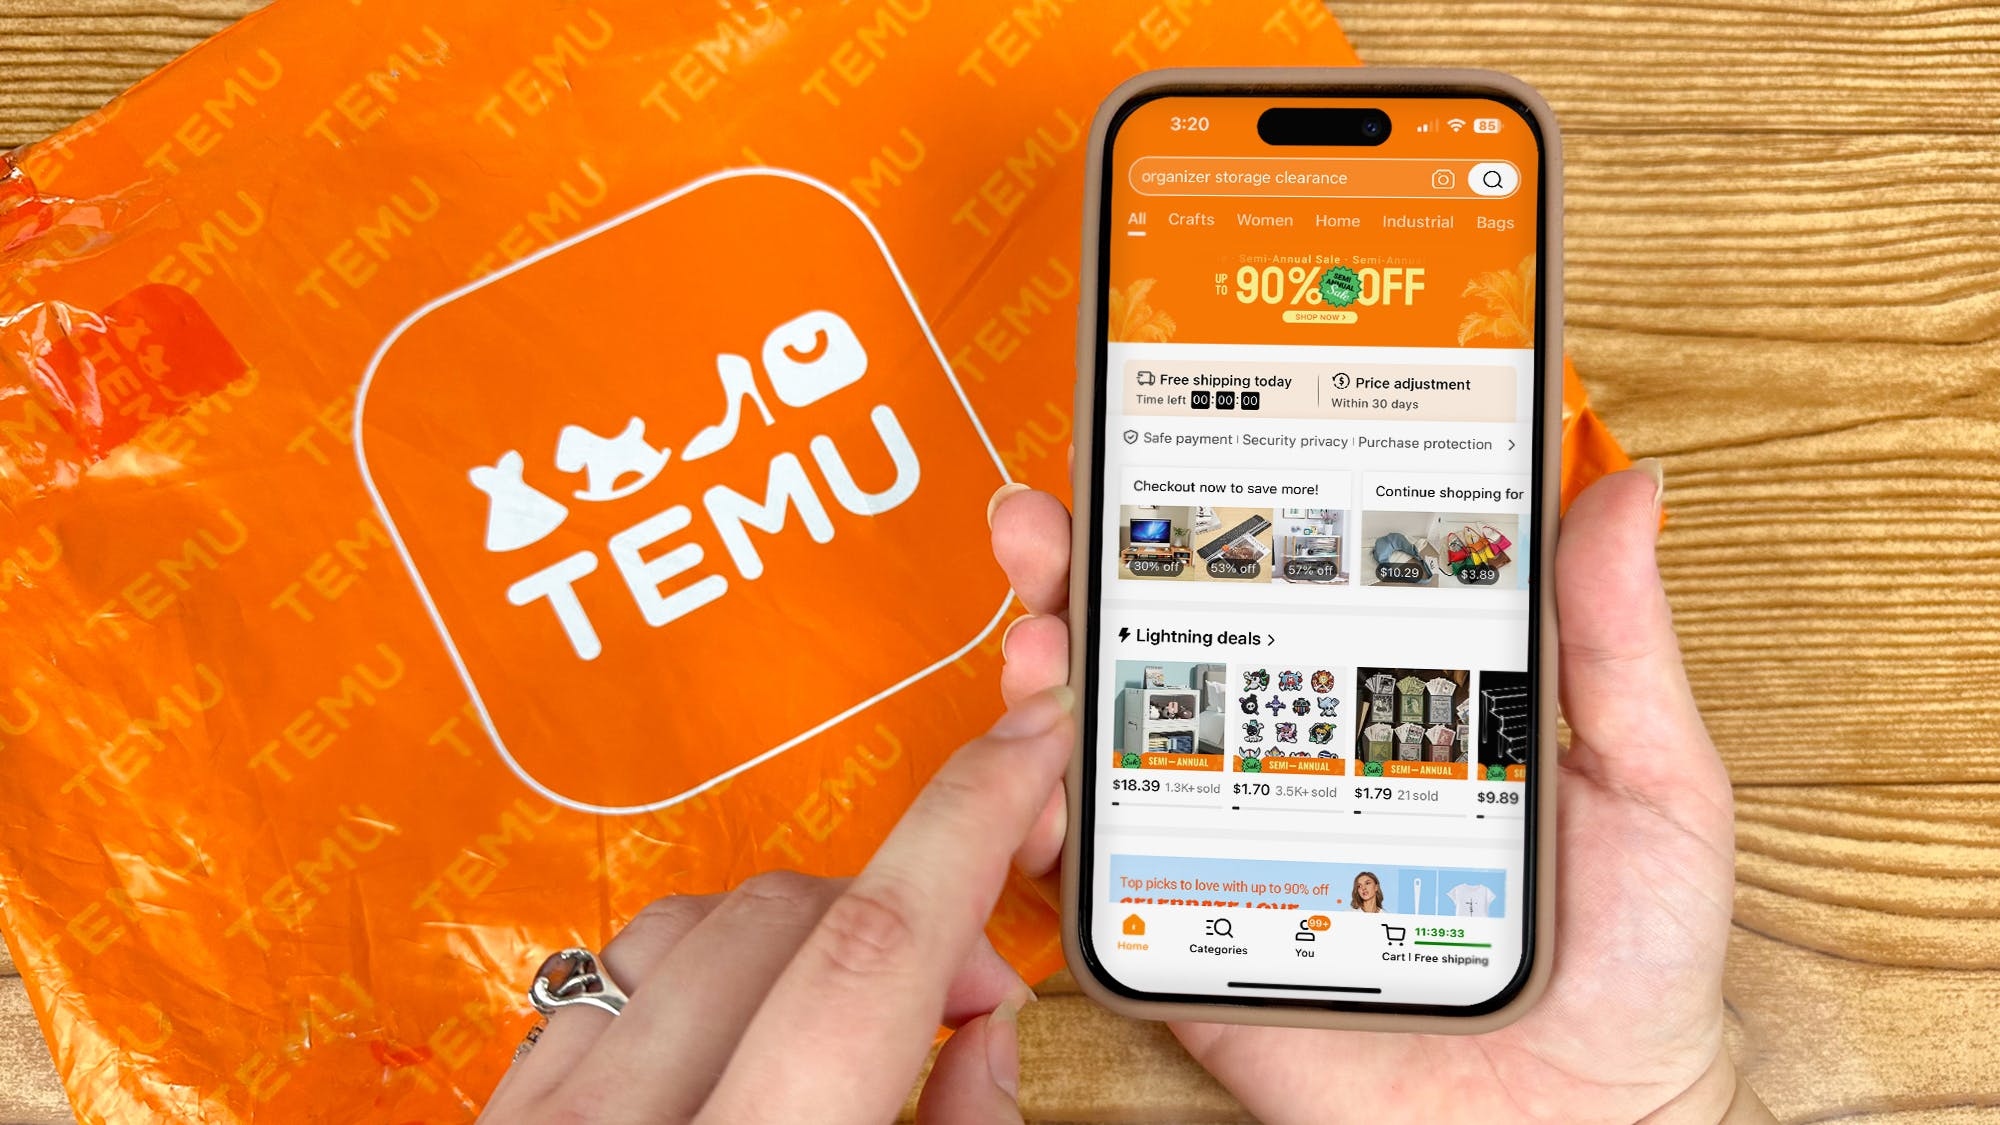 Is Temu legit and safe to order from? All you need to know